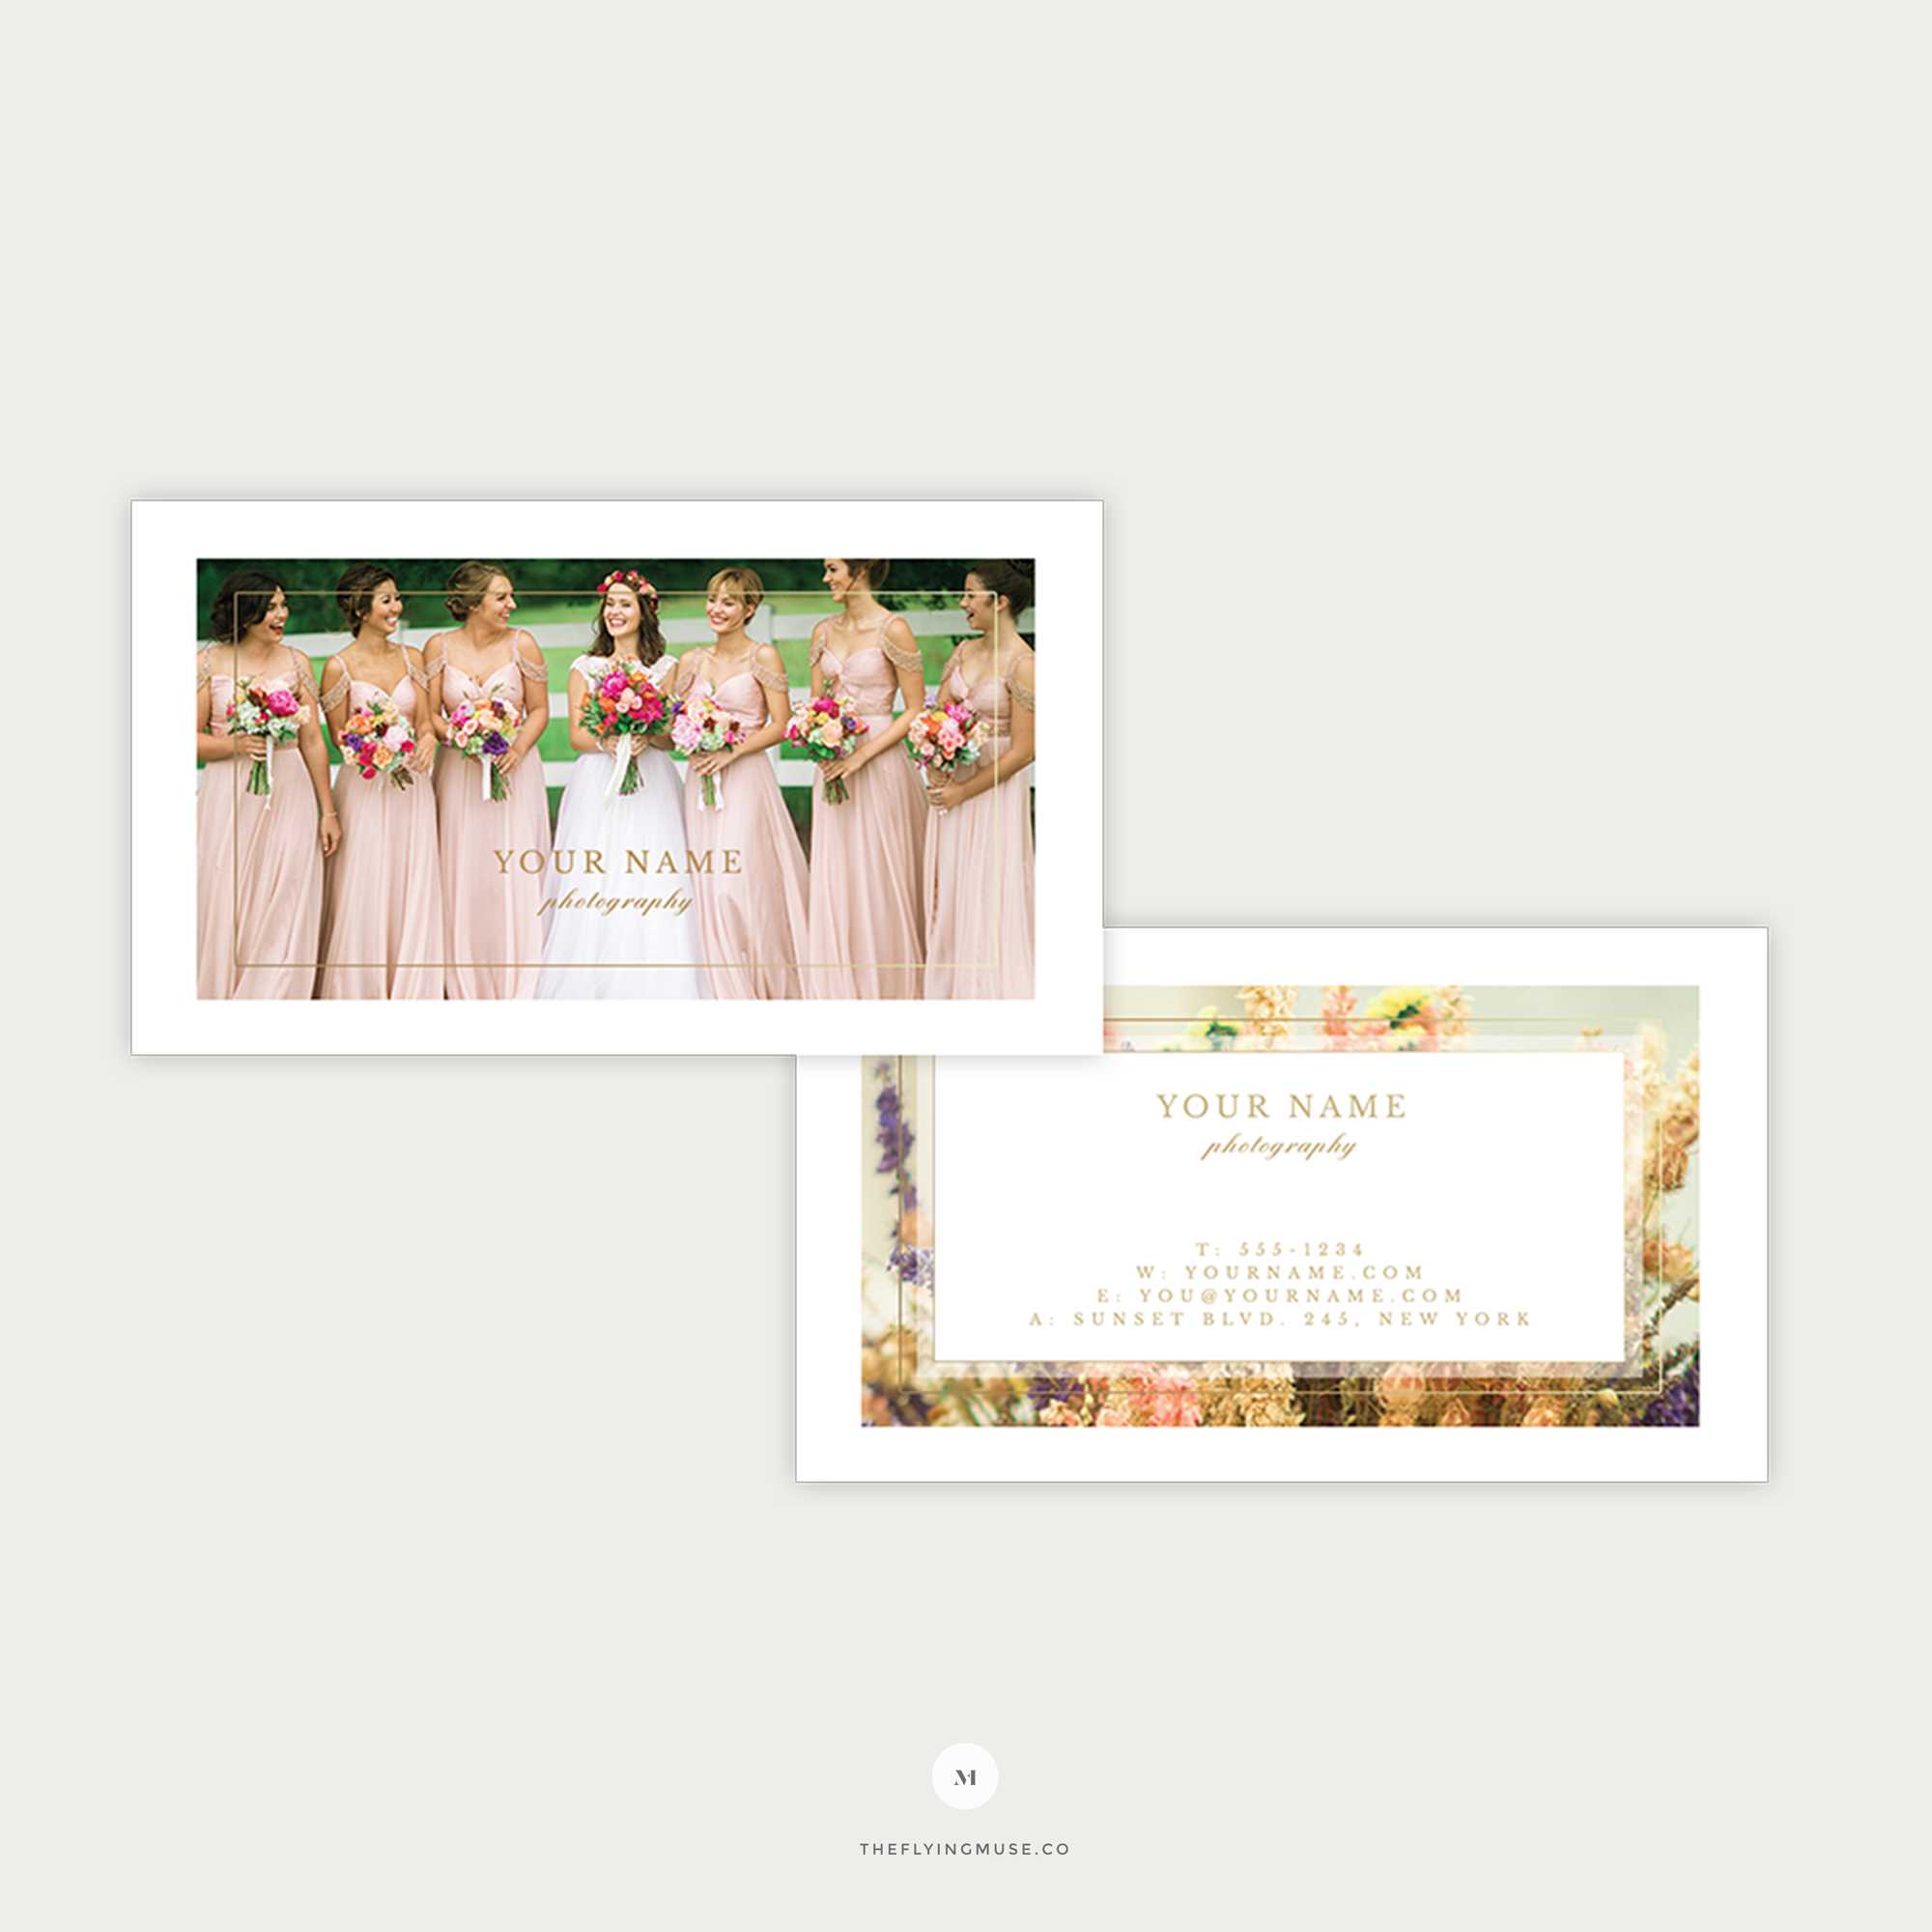 Elegant Wedding Photography Business Card Template | The Flying Muse For Photography Referral Card Templates